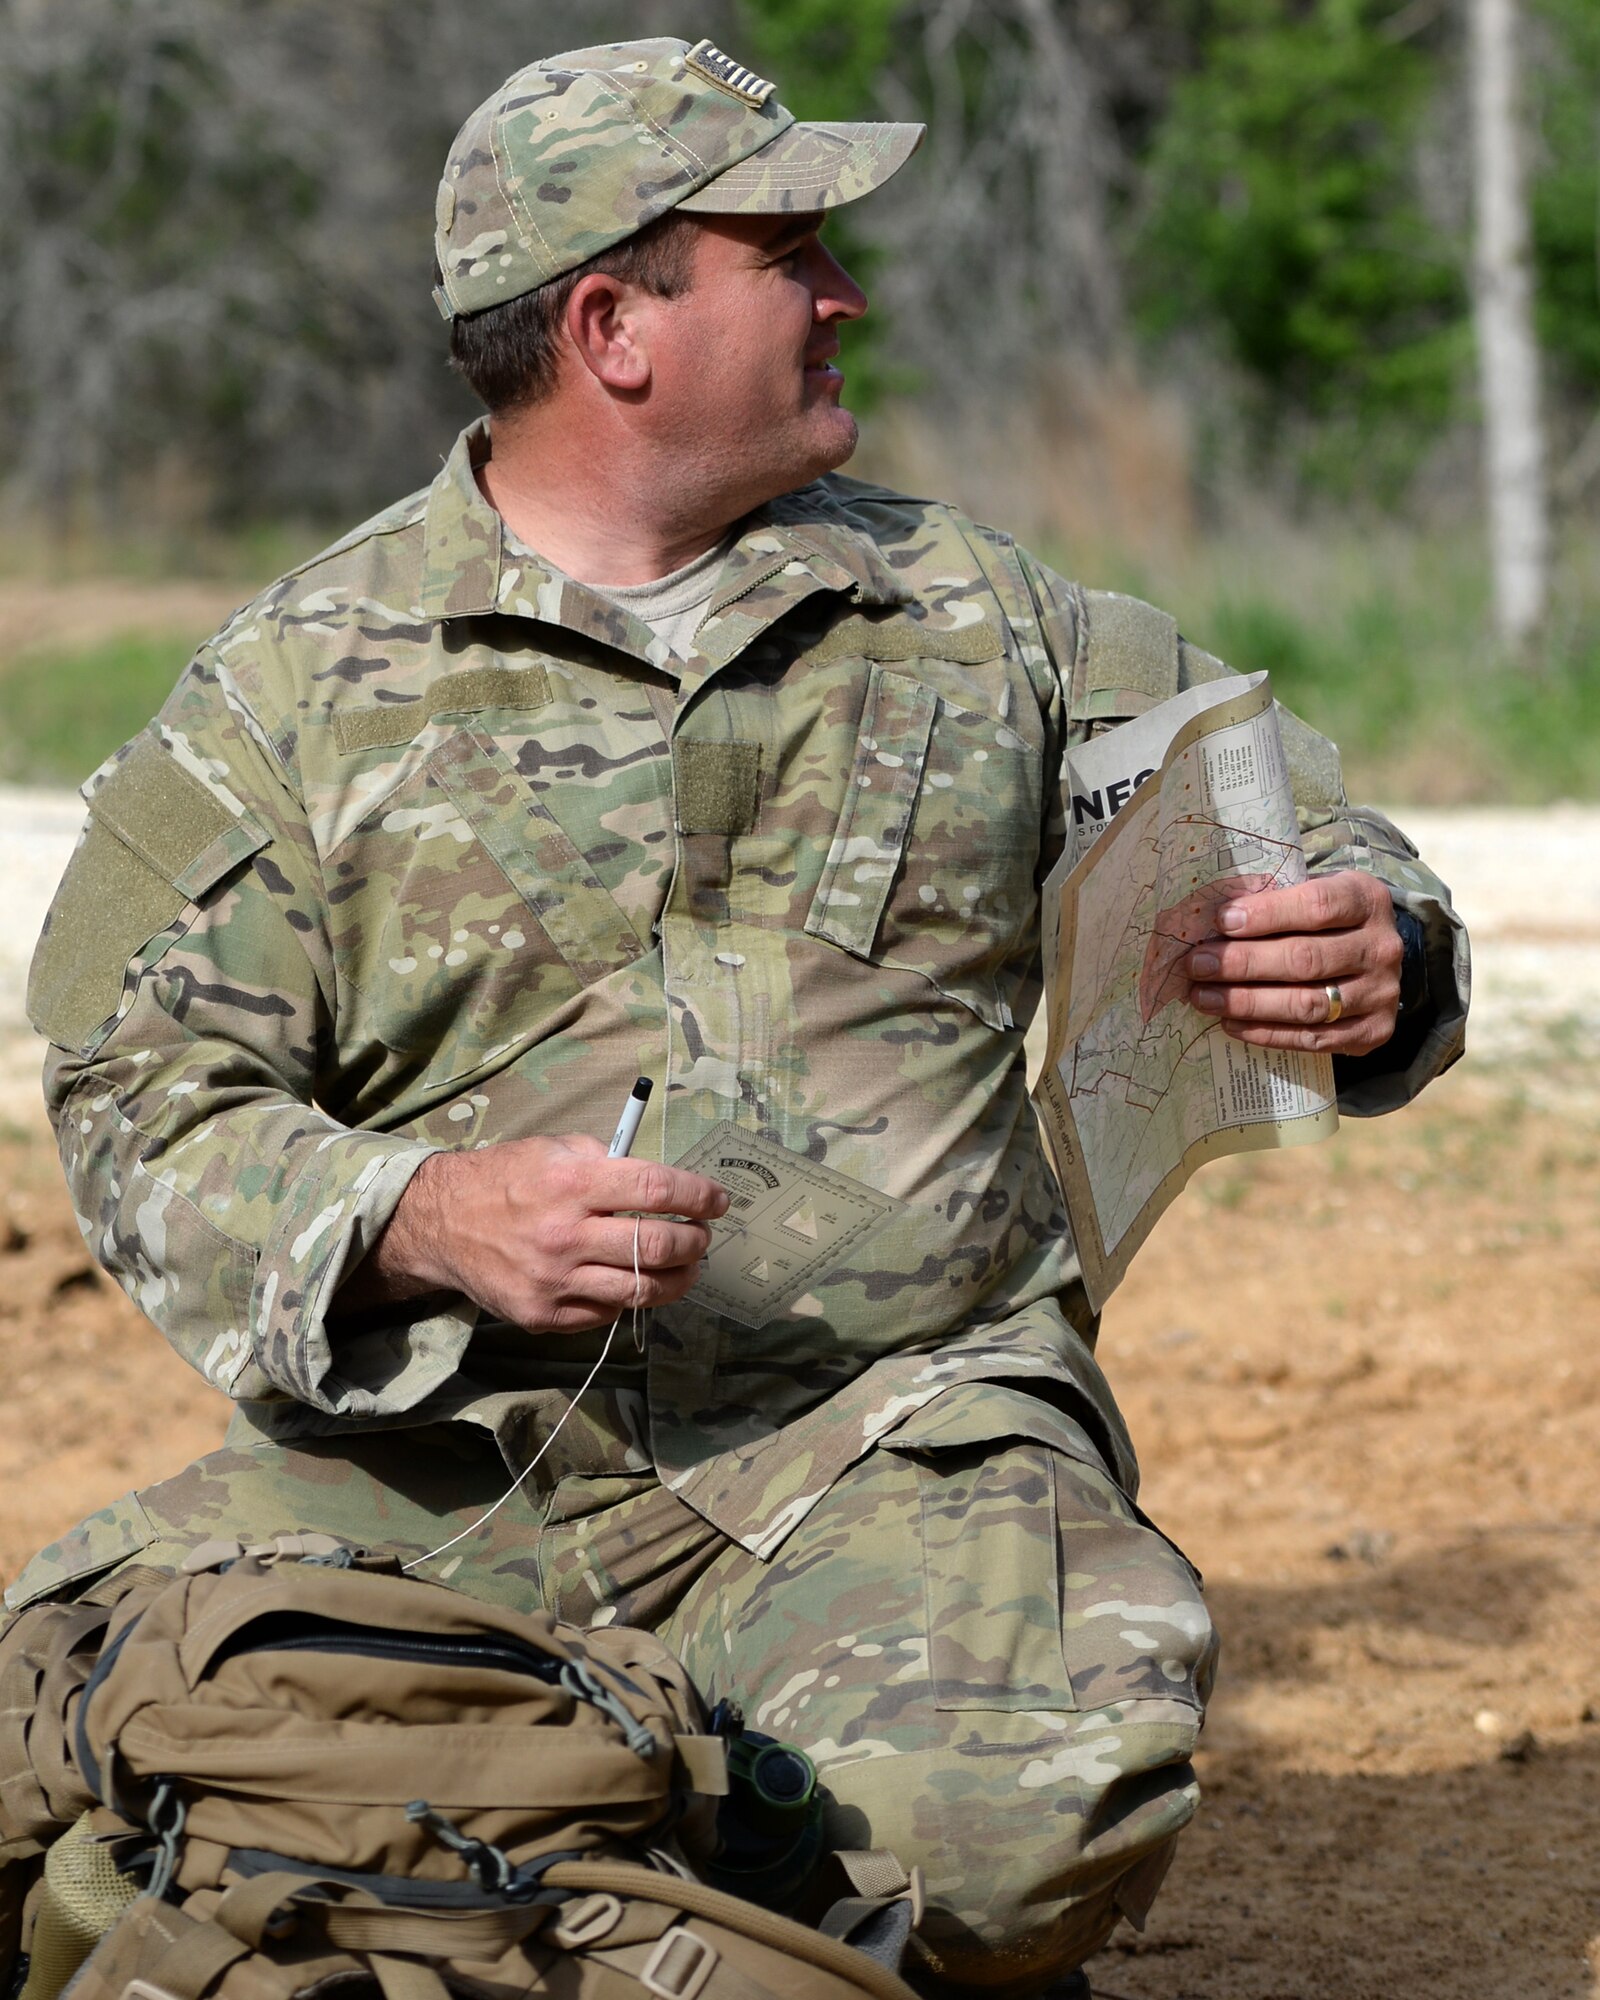 A tactical air control party members with the 147th Air Support Operations Squadron, 147th Reconnaissance Wing, based at Ellington Field Joint Reserve Base in Houston, Texas, prepares to navigate to his first point during a land navigation exercise at Camp Swift in Bastrop, Texas. The squadron travelled to the camp to perform a weeklong field training exercise that allowed the members to maintain their proficiency in their career field.